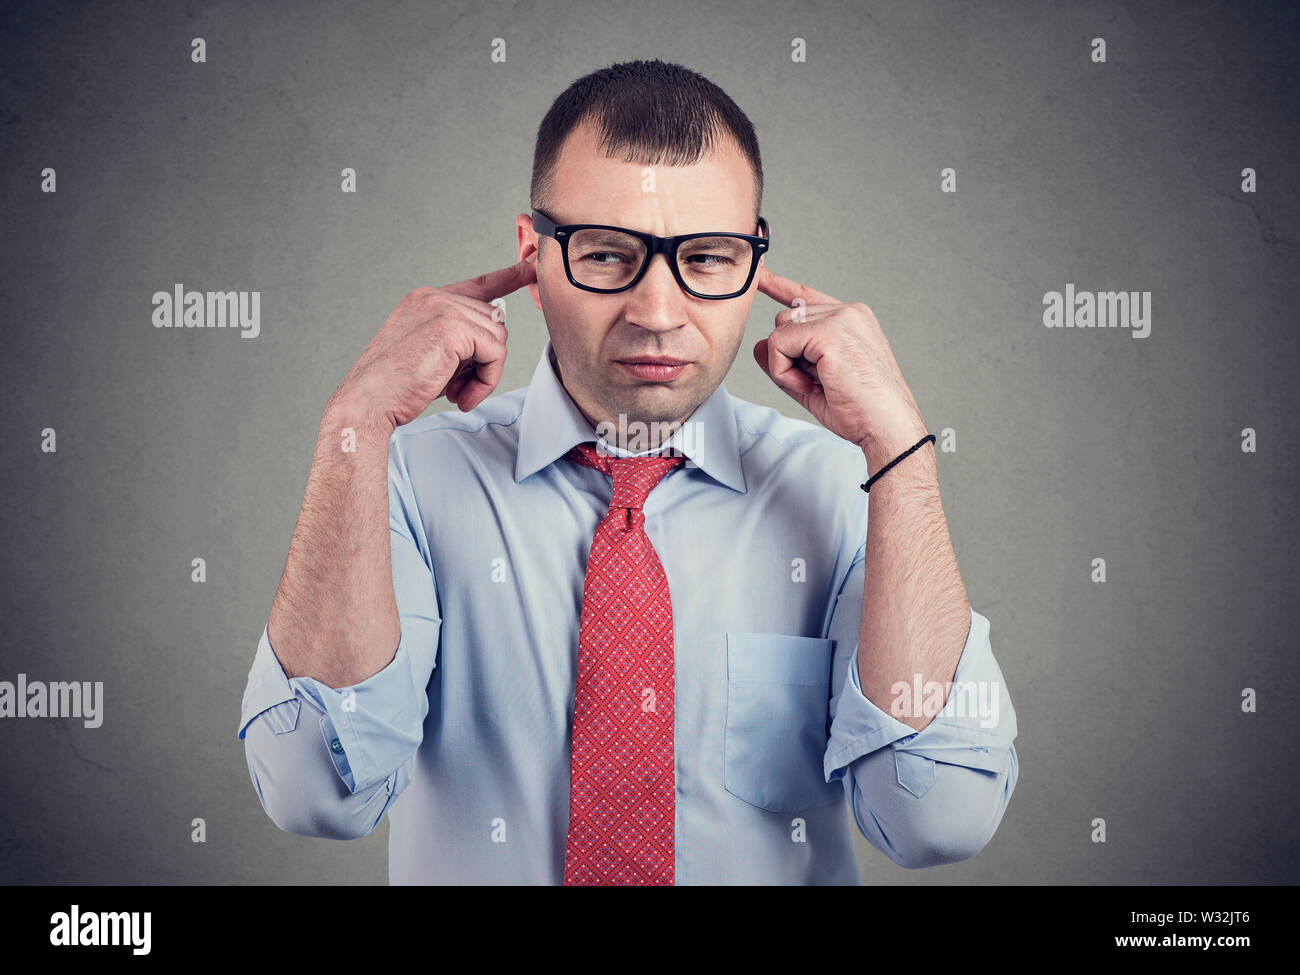 Annoyed man looking grumpy plugging with fingers ears unwilling to listen to anyone. Stock Photo